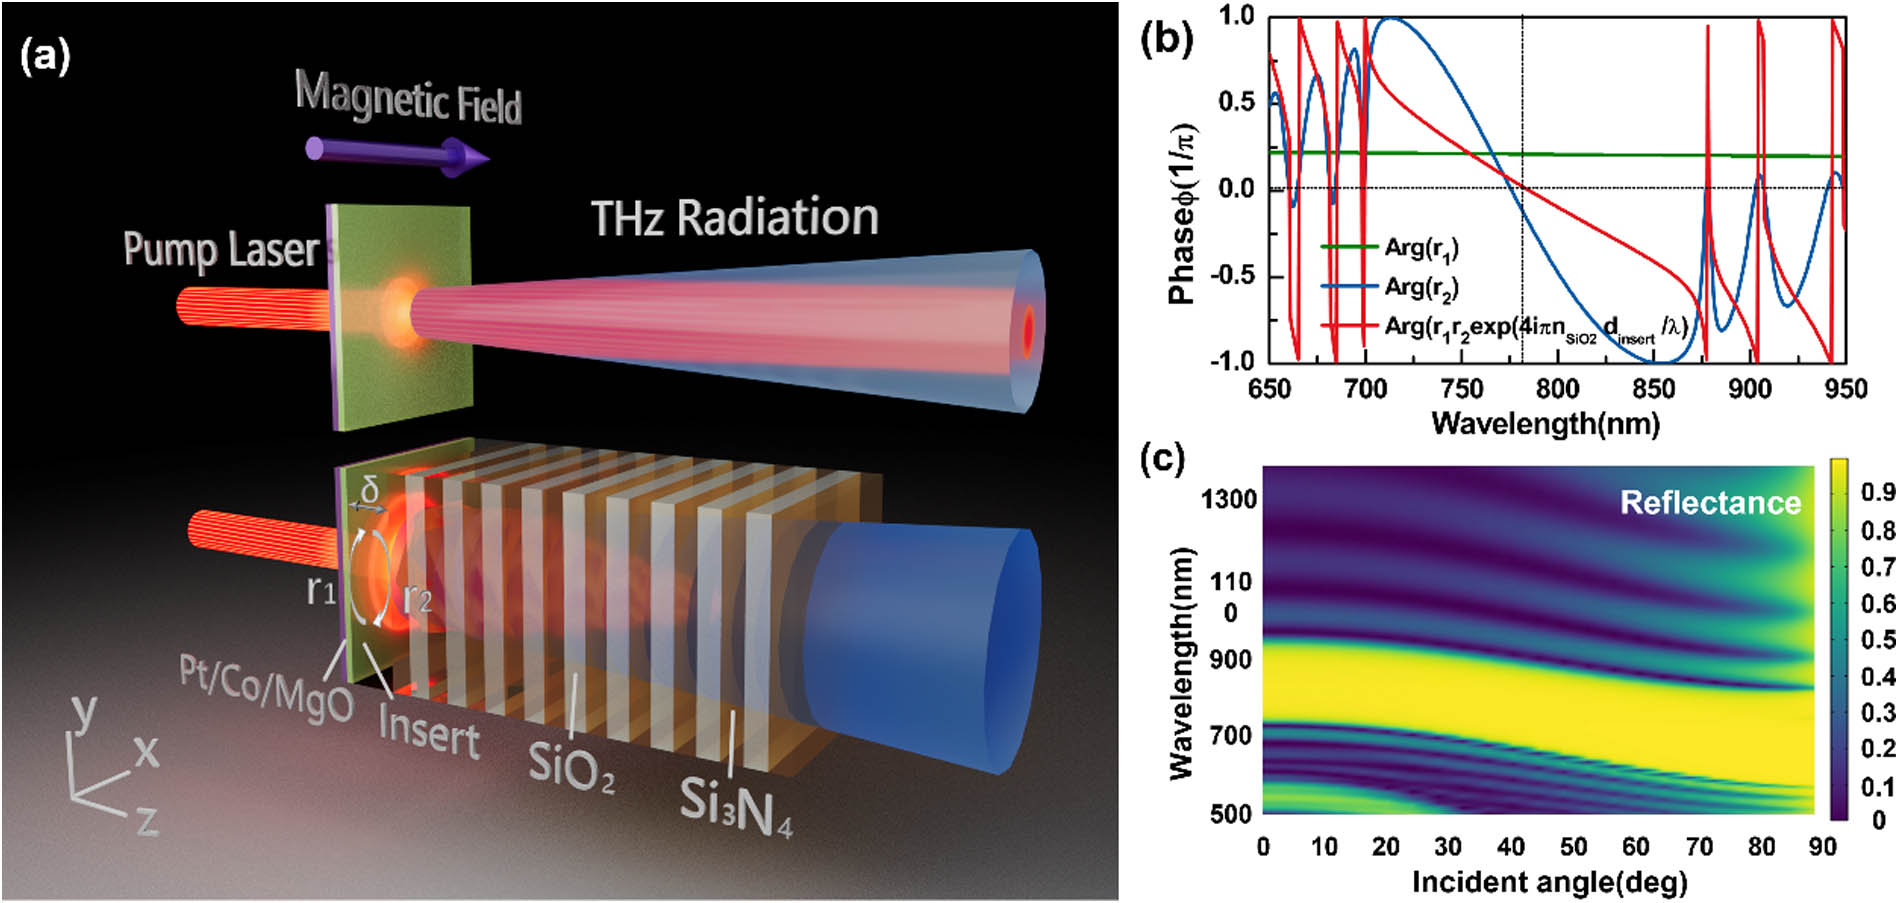 (a) Schematic illustration of the spin thin films without TPC and with TPC structure for THz radiation. (b) Phase of r1, r2, and r1r2 exp[i(4πnSiO2dinsert)/λ] as a function of wavelength, when the thickness of the optical cavity is 57 nm. (c) Simulated reflectance spectra of the dielectric layers as a function of incidence angle and wavelength for TM polarization.